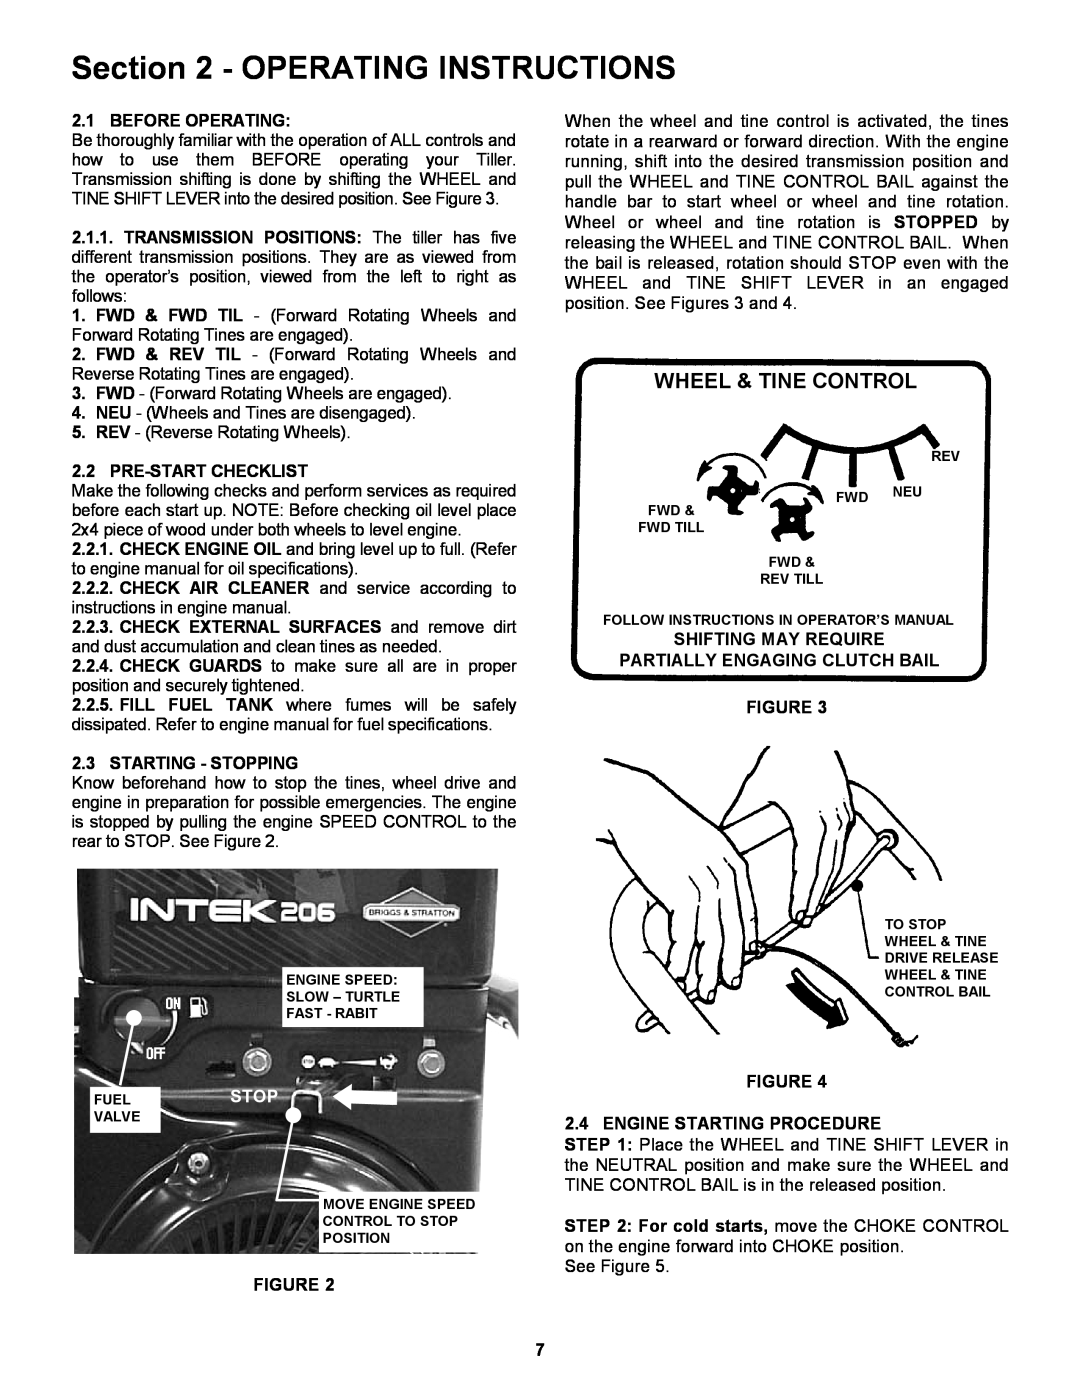 Snapper EICFR5505BV important safety instructions Operating Instructions, Wheel & Tine Control 